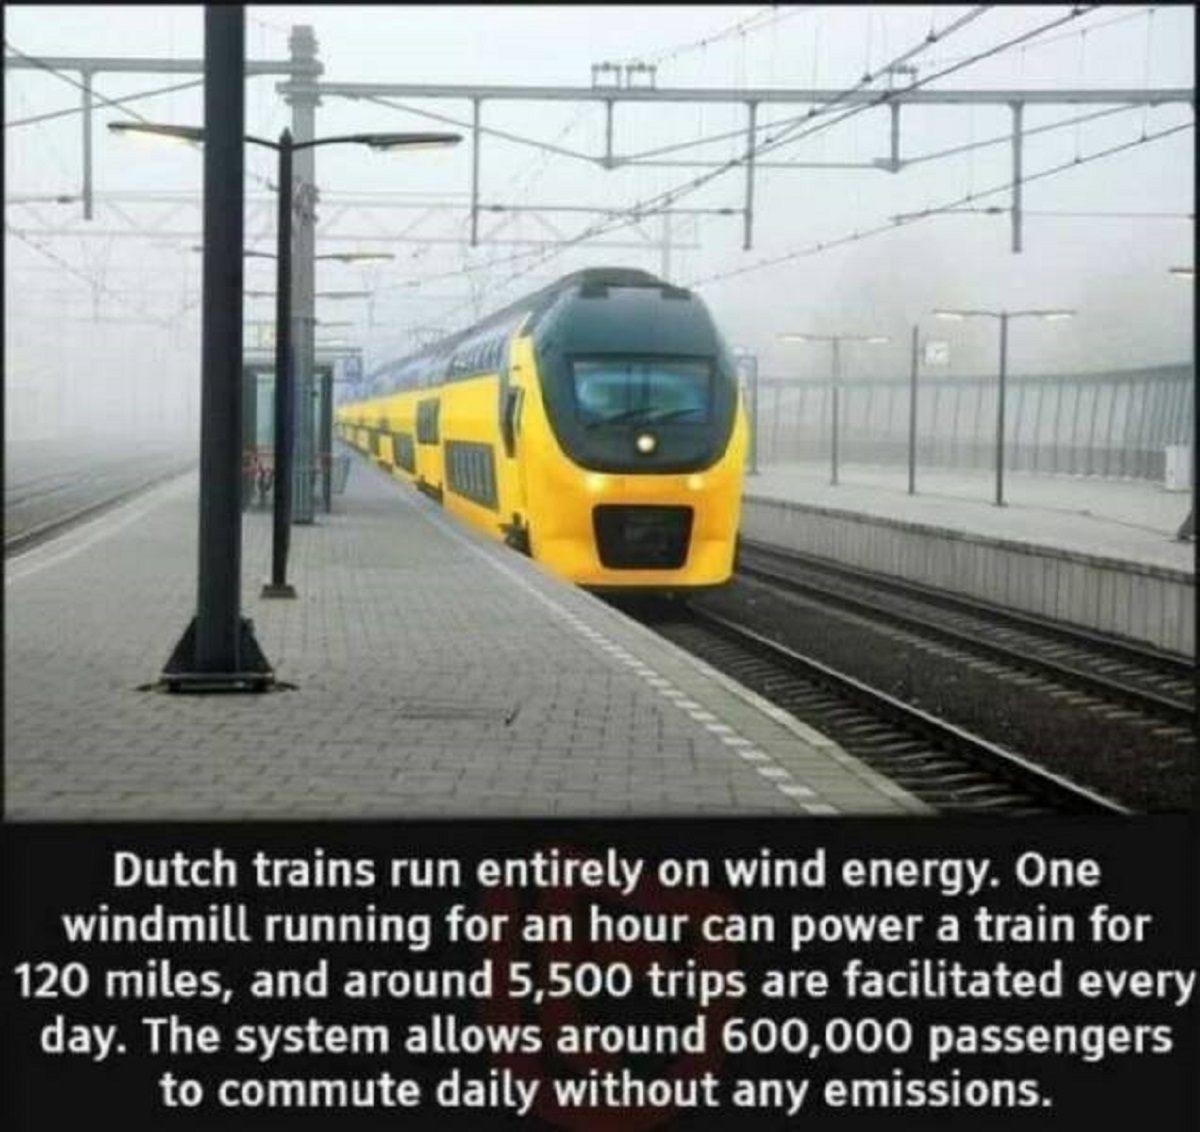 Dutch trains run entirely on wind energy. One windmill running for an hour can power a train for 120 miles, and around 5,500 trips are facilitated every day. The system allows around 600,000 passengers to commute daily without any emissions.